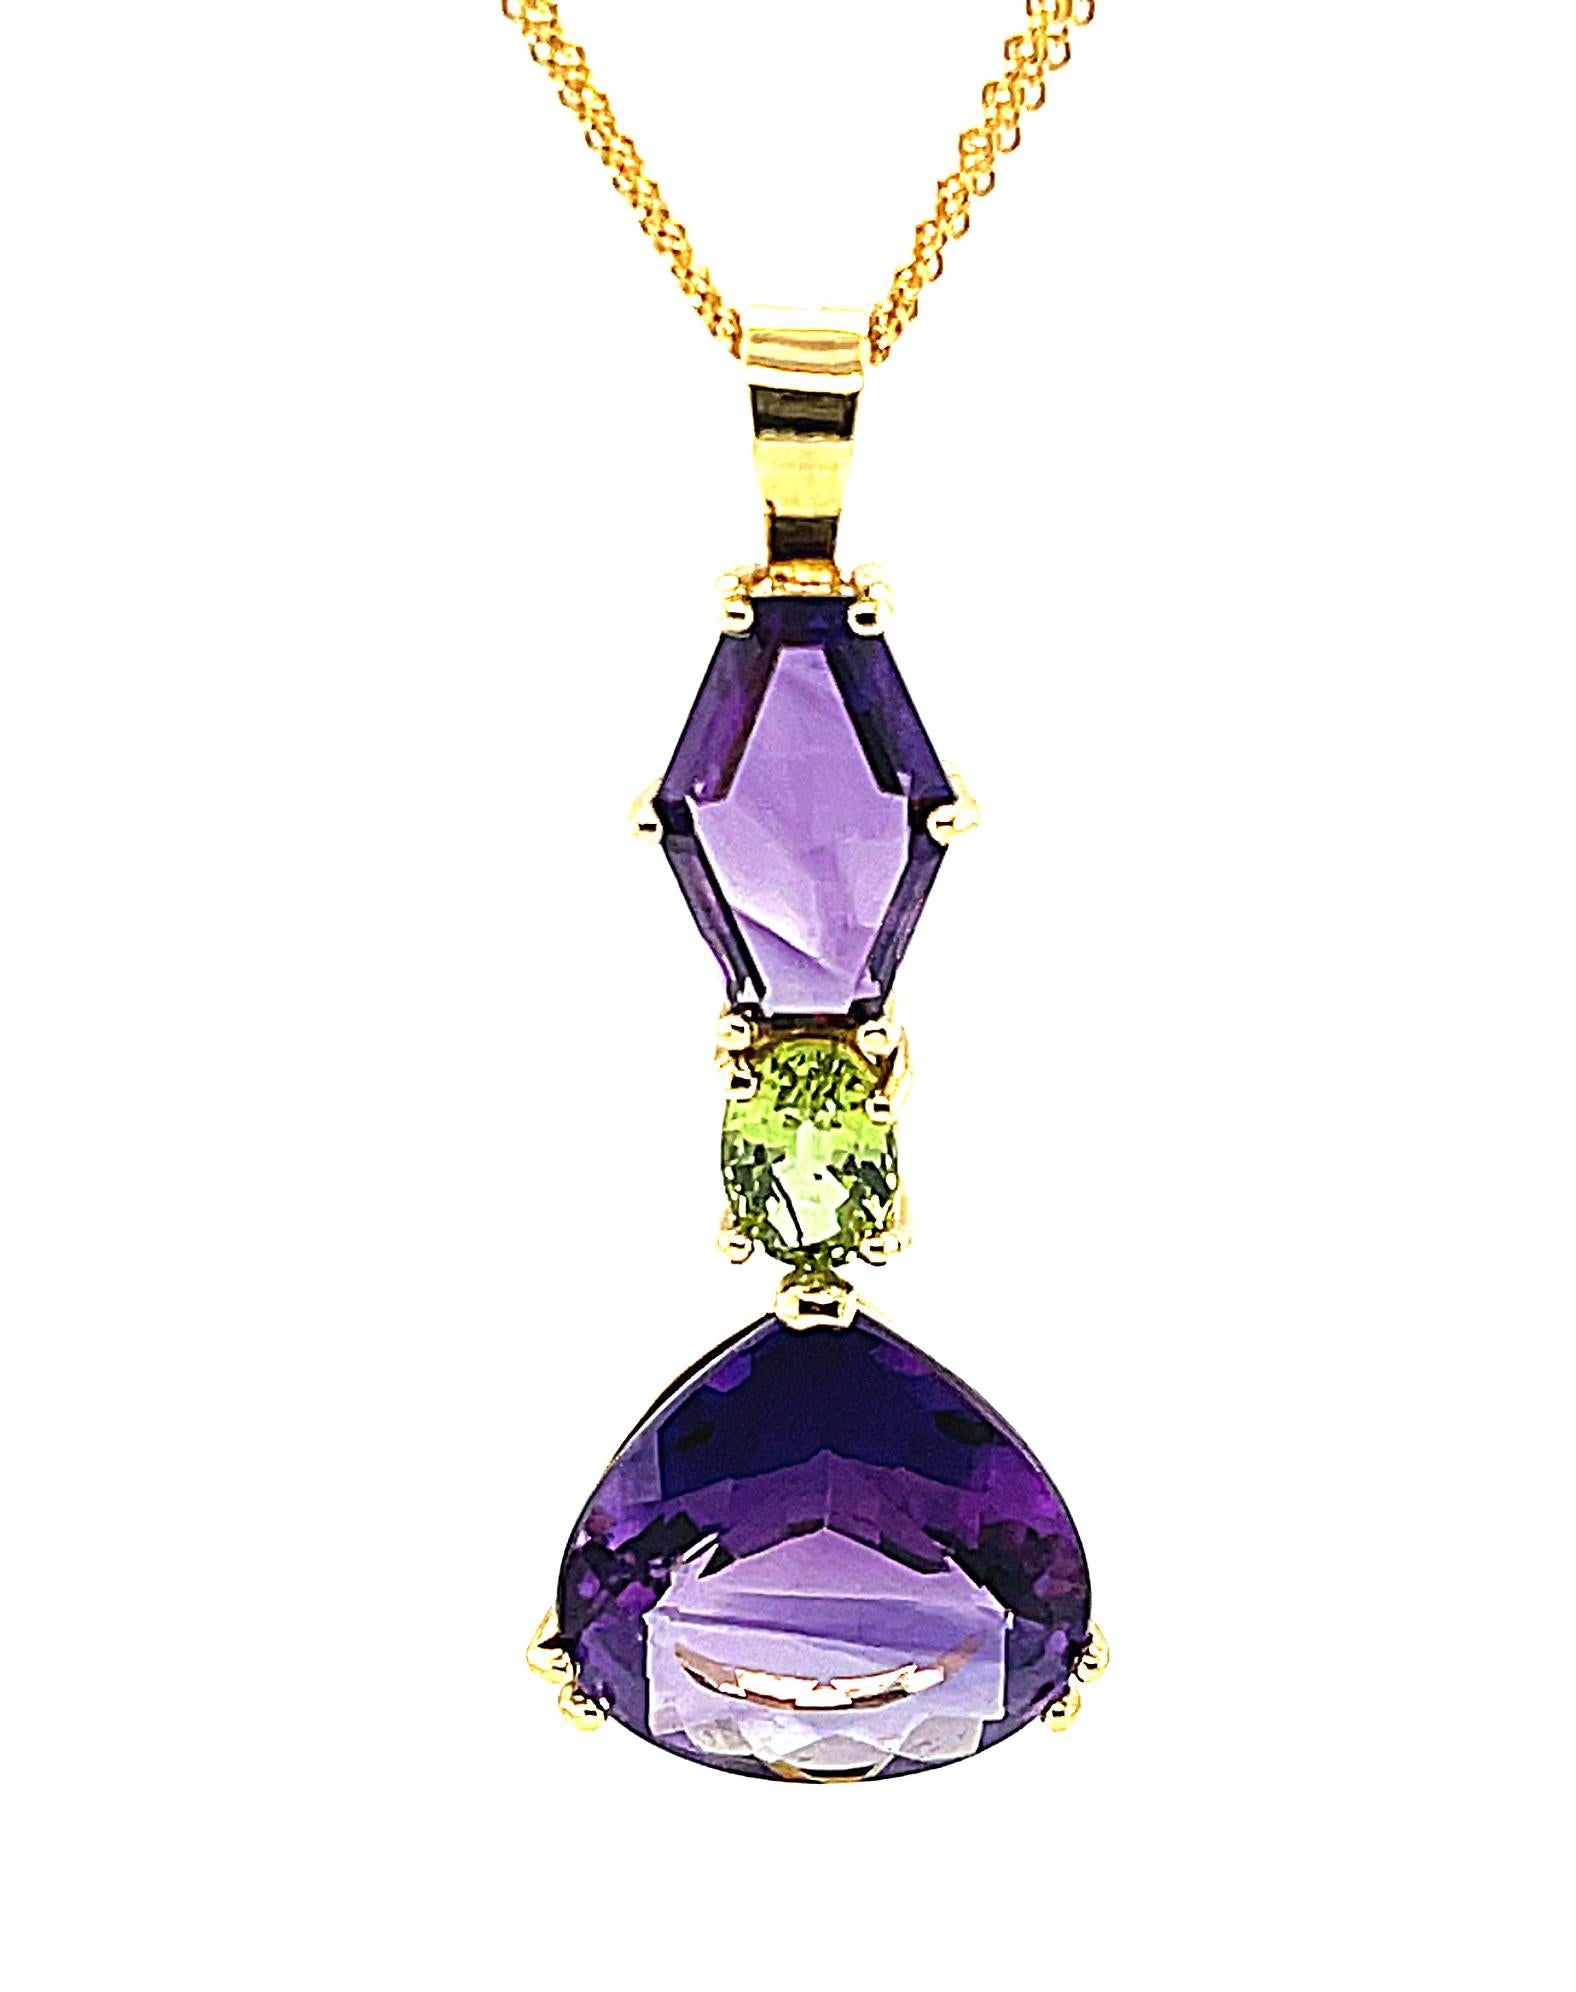 This lovely pendant has such a fun spirit! Fancy shaped colorful gemstones make this striking necklace a 